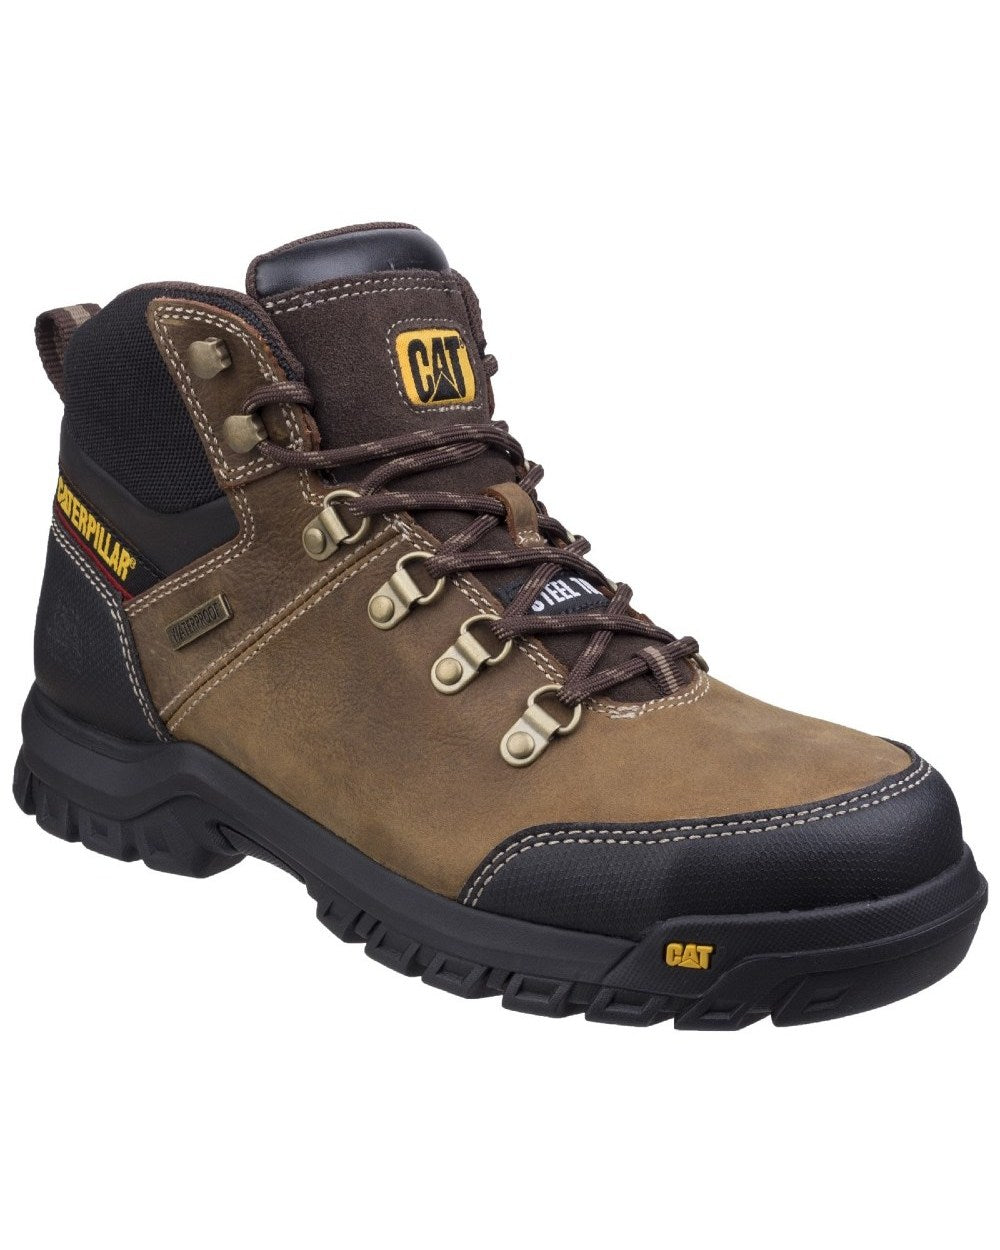 Seal Brown Coloured Caterpillar Framework Safety Boot ST S3 HRO SRA On A White Background 